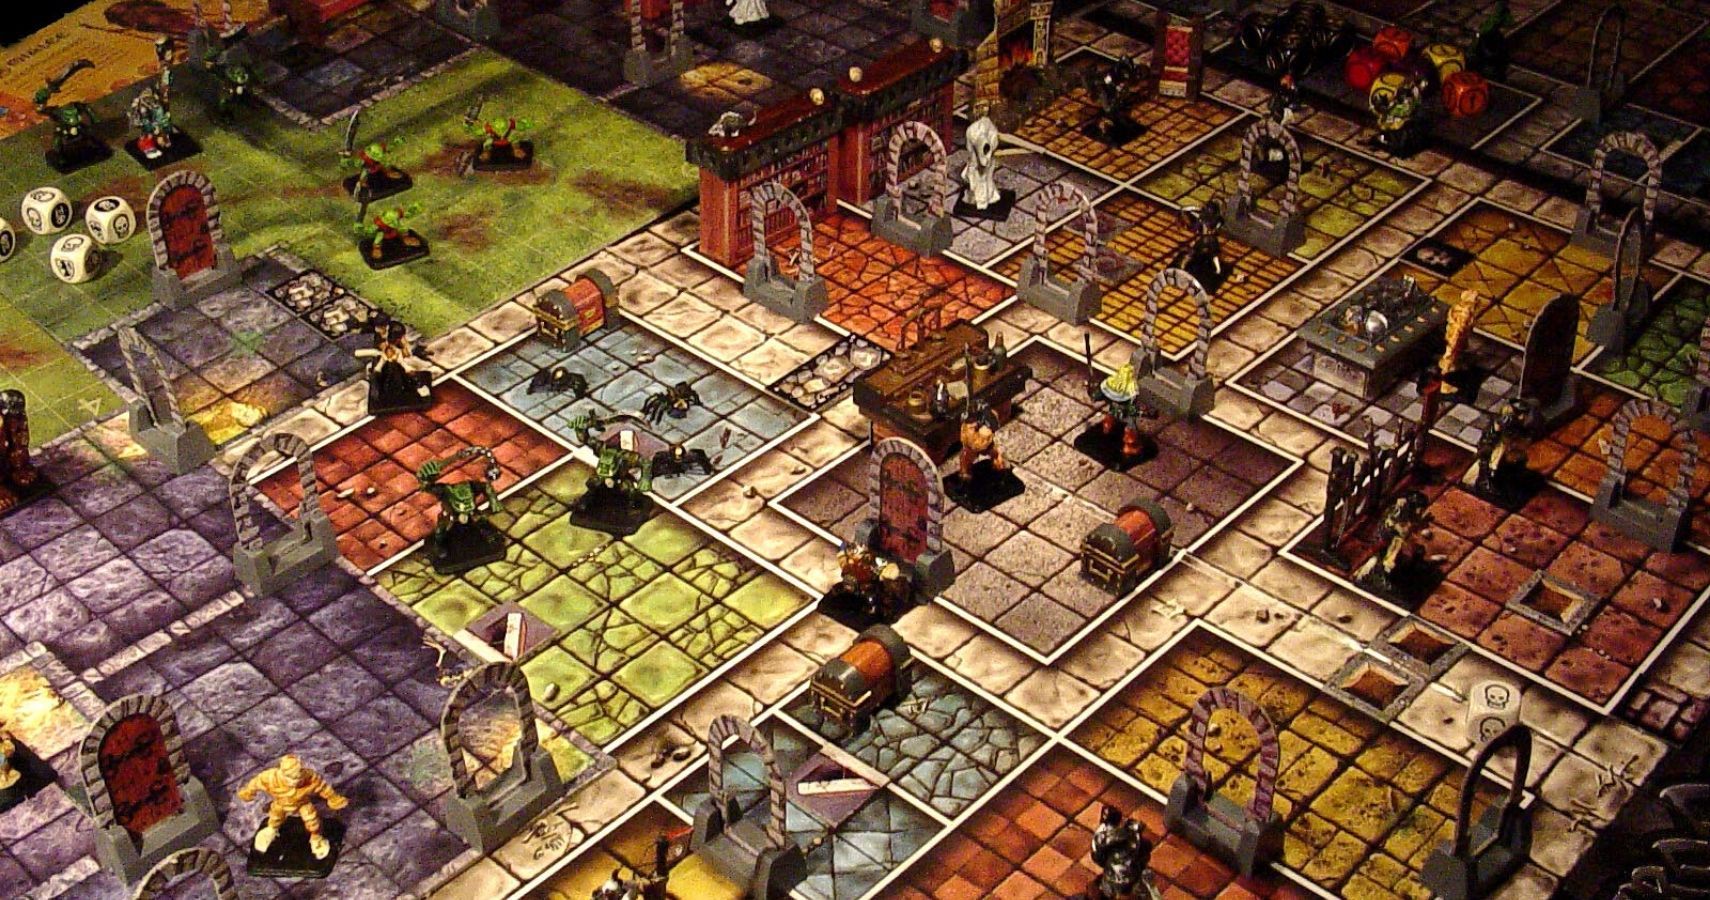 10-tabletop-games-to-play-if-you-like-dungeons-dragons